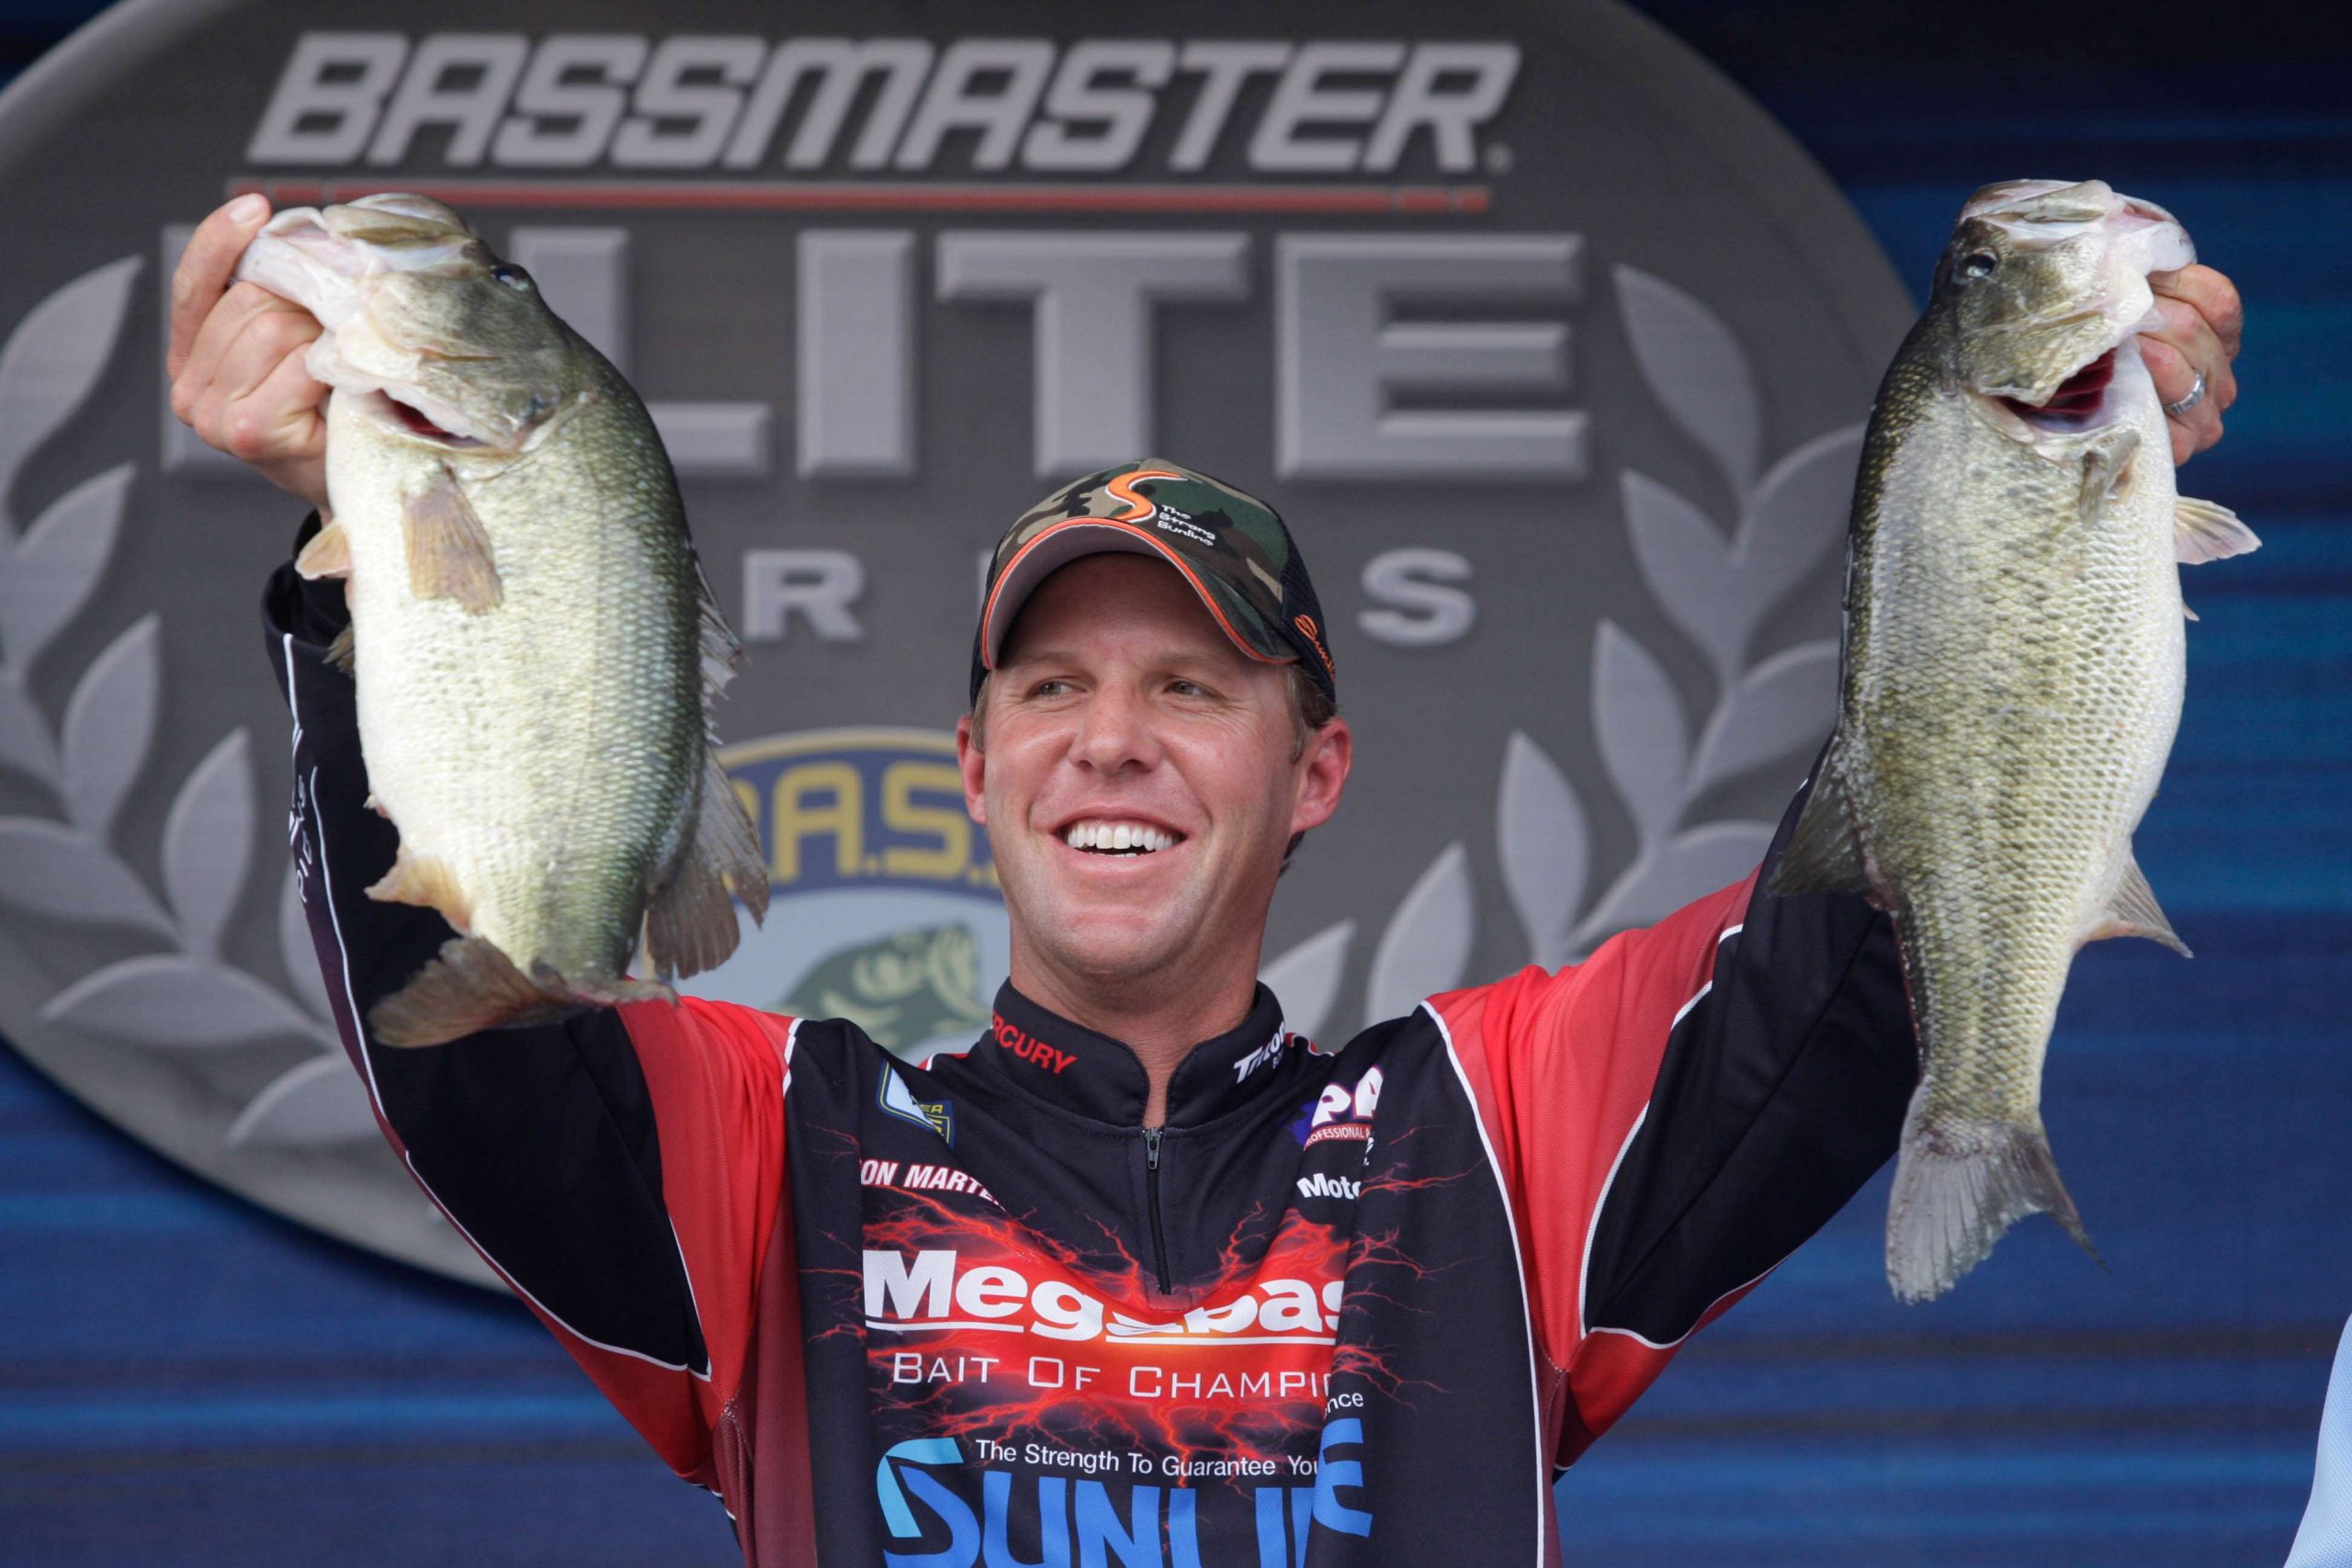 Martens brought another haul of 28 pounds, 11 ounces on Day 3, and it was enough to keep him in the lead.